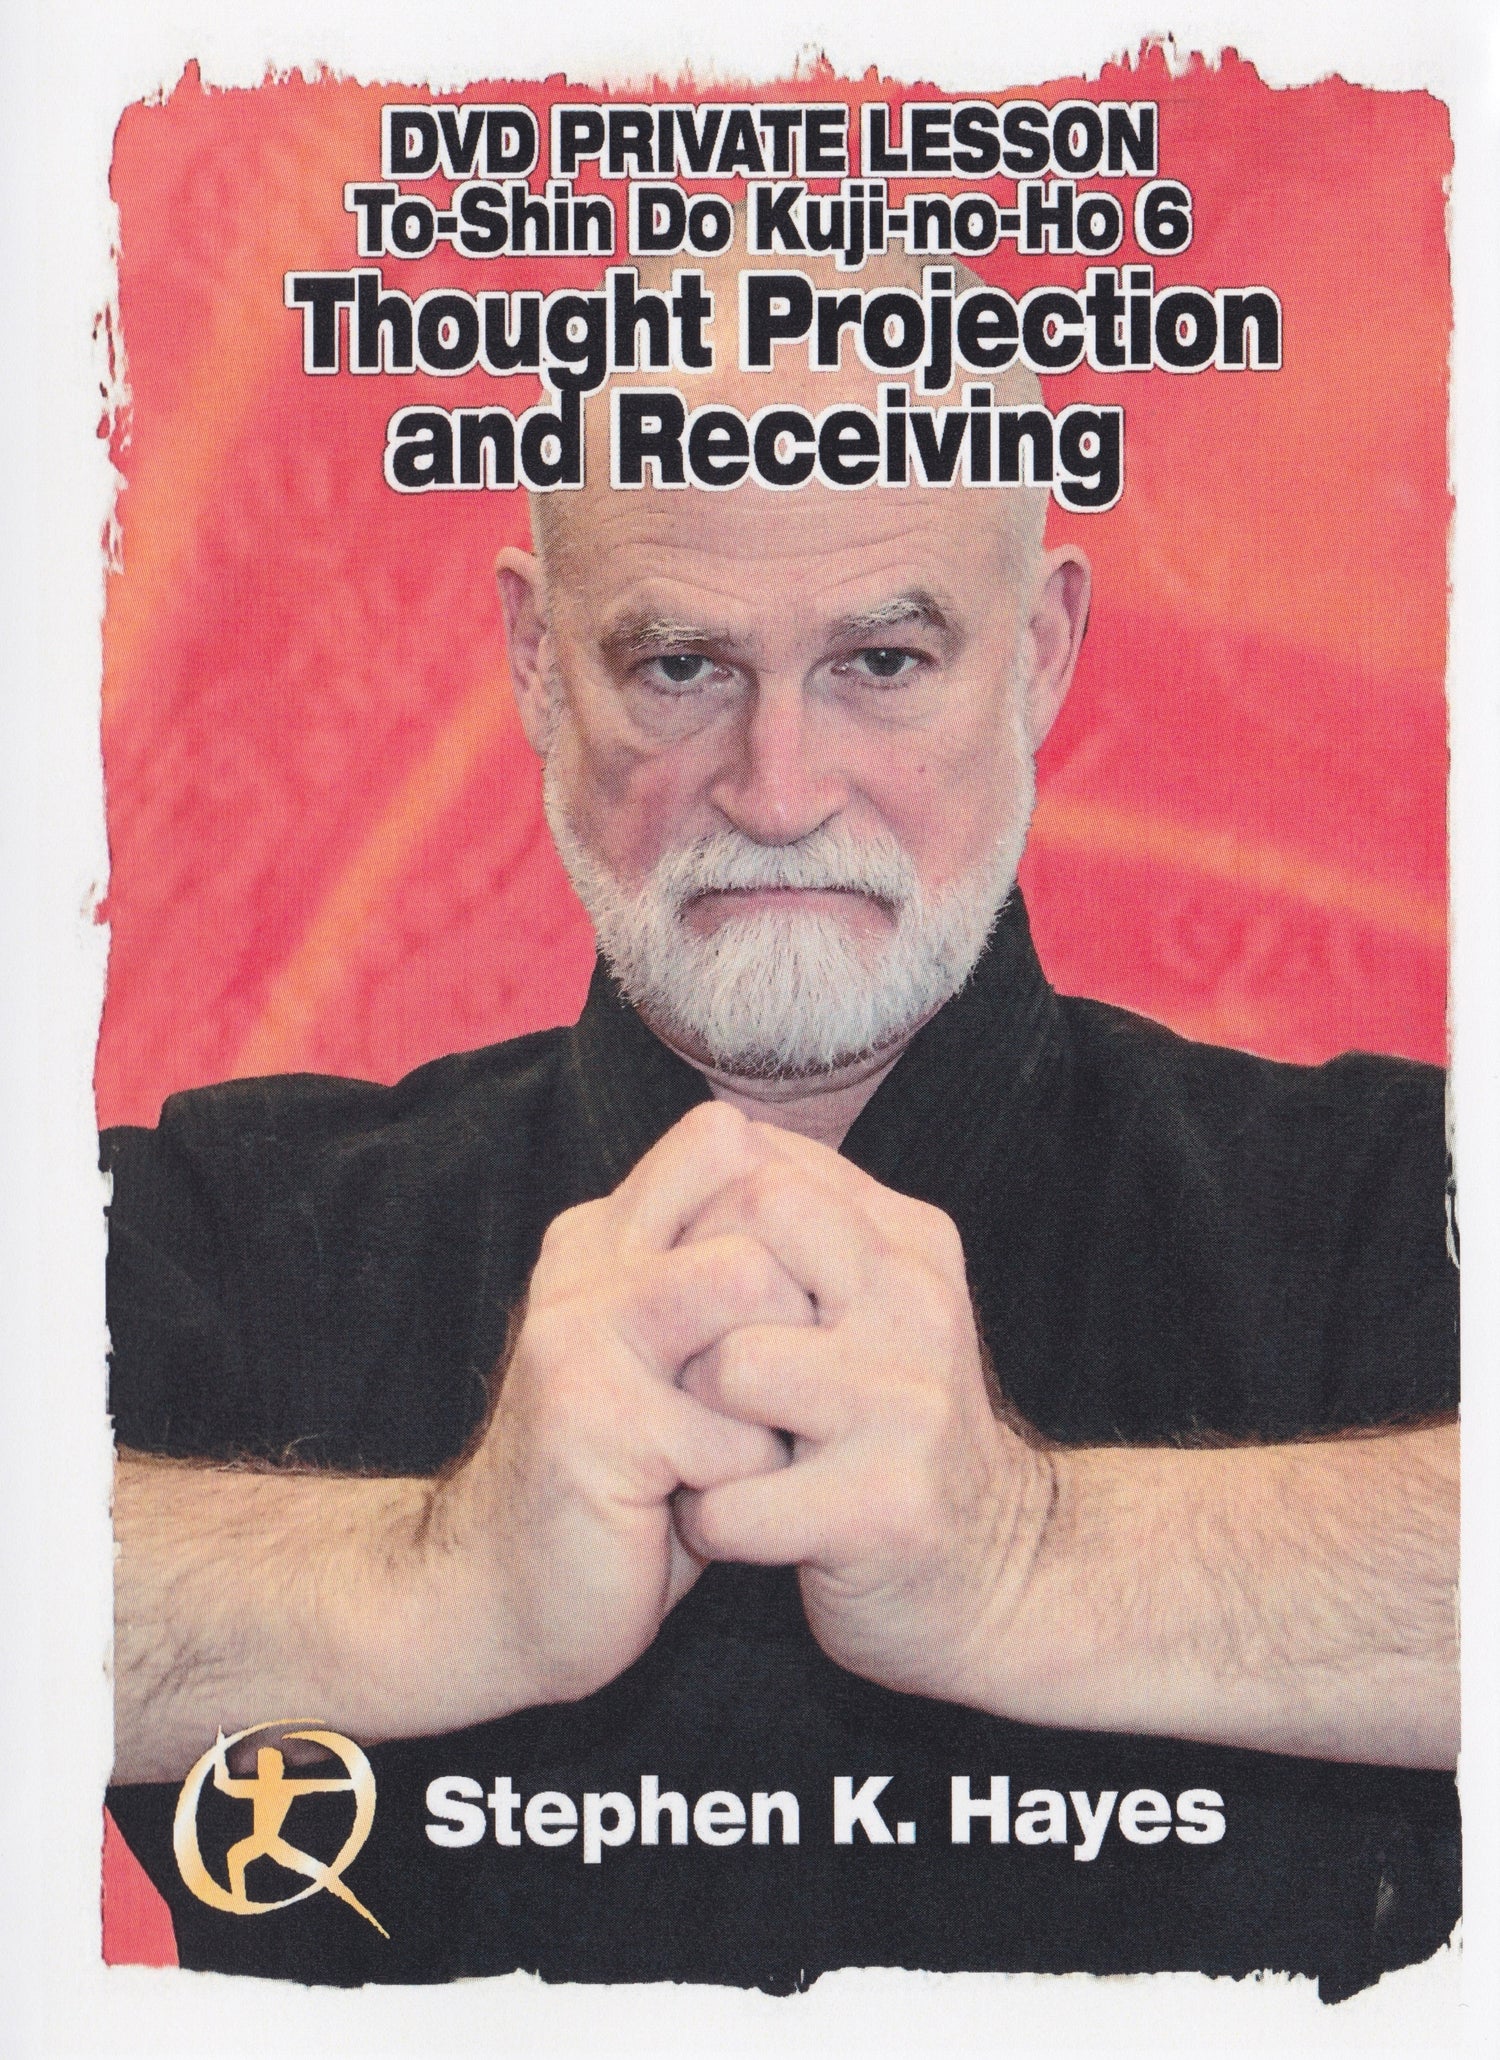 Toshindo Kuji 6 Thought Projection DVD with Stephen Hayes